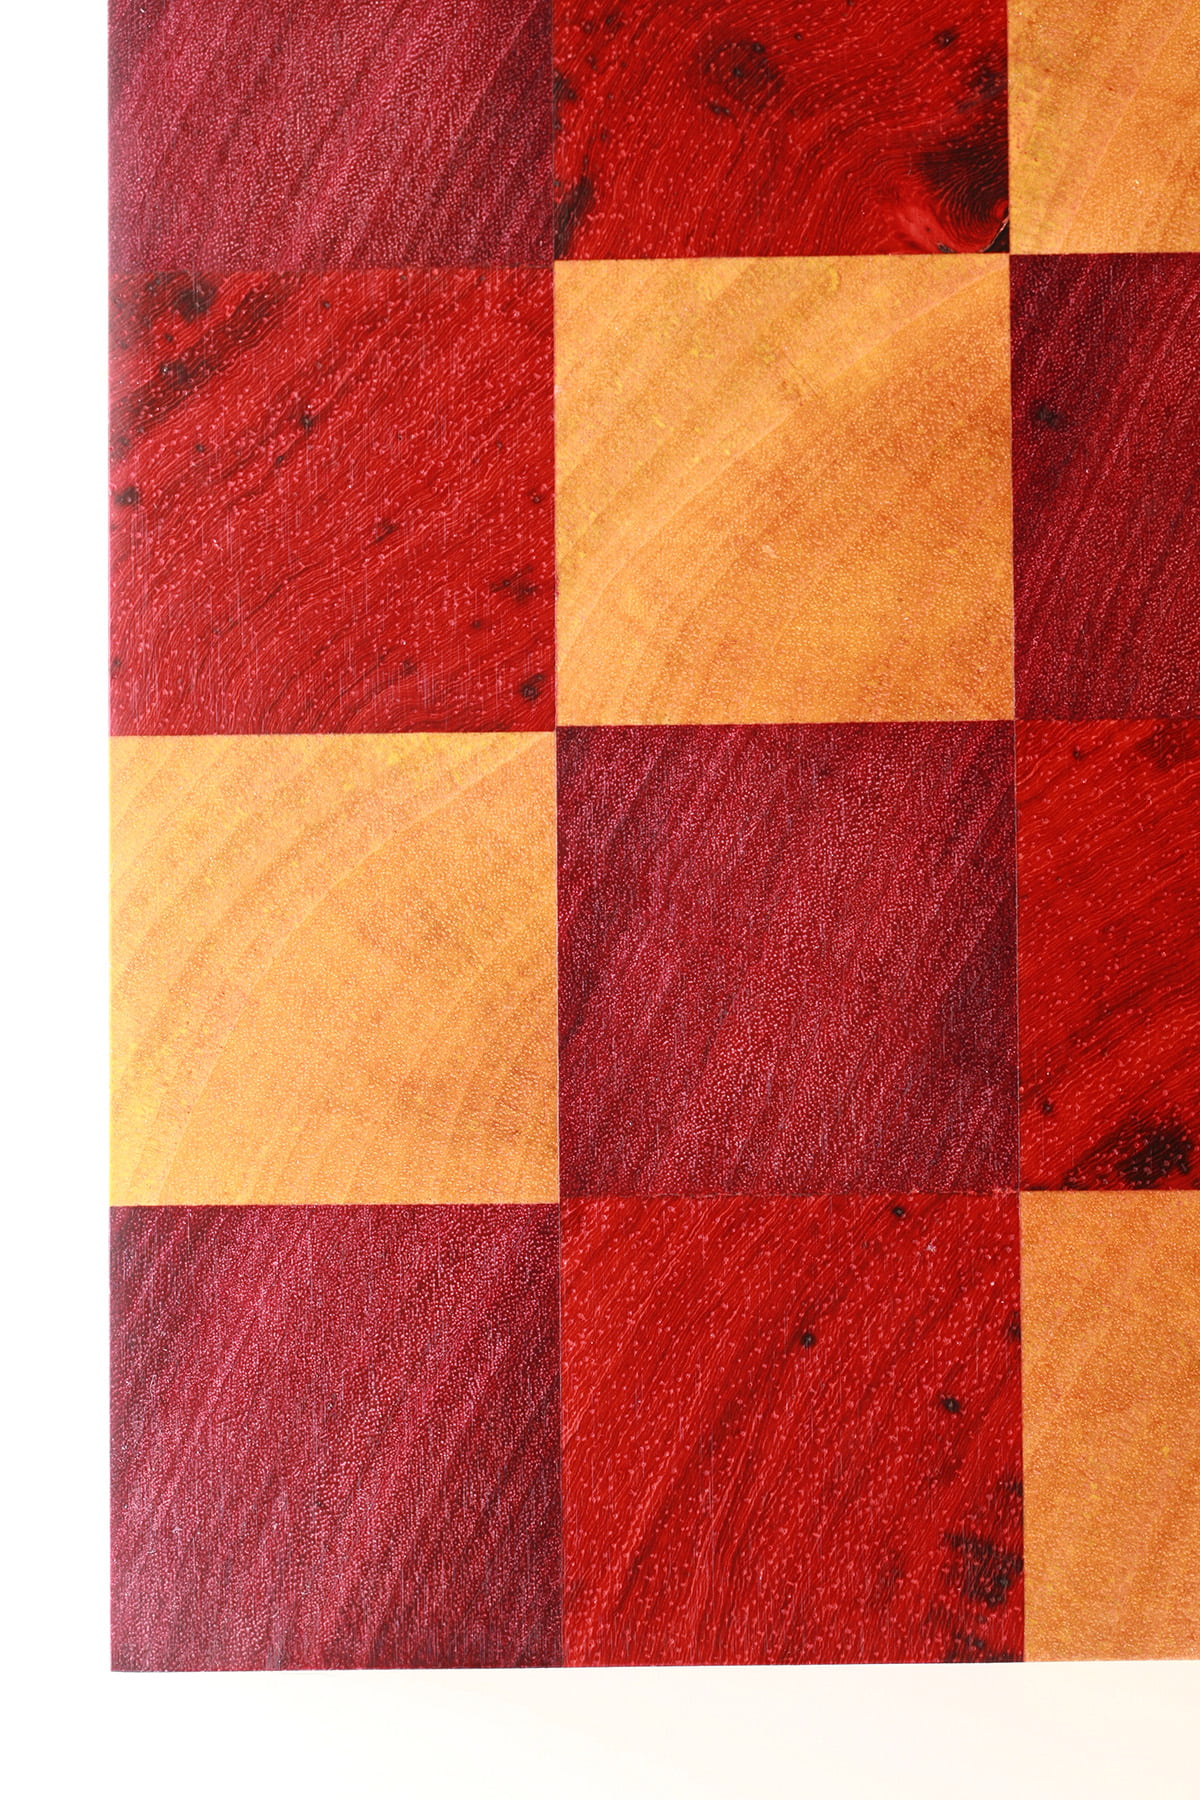 A close up view of a DIY cutting board, made up of colourful squares of wood - red, purple, and yellow.